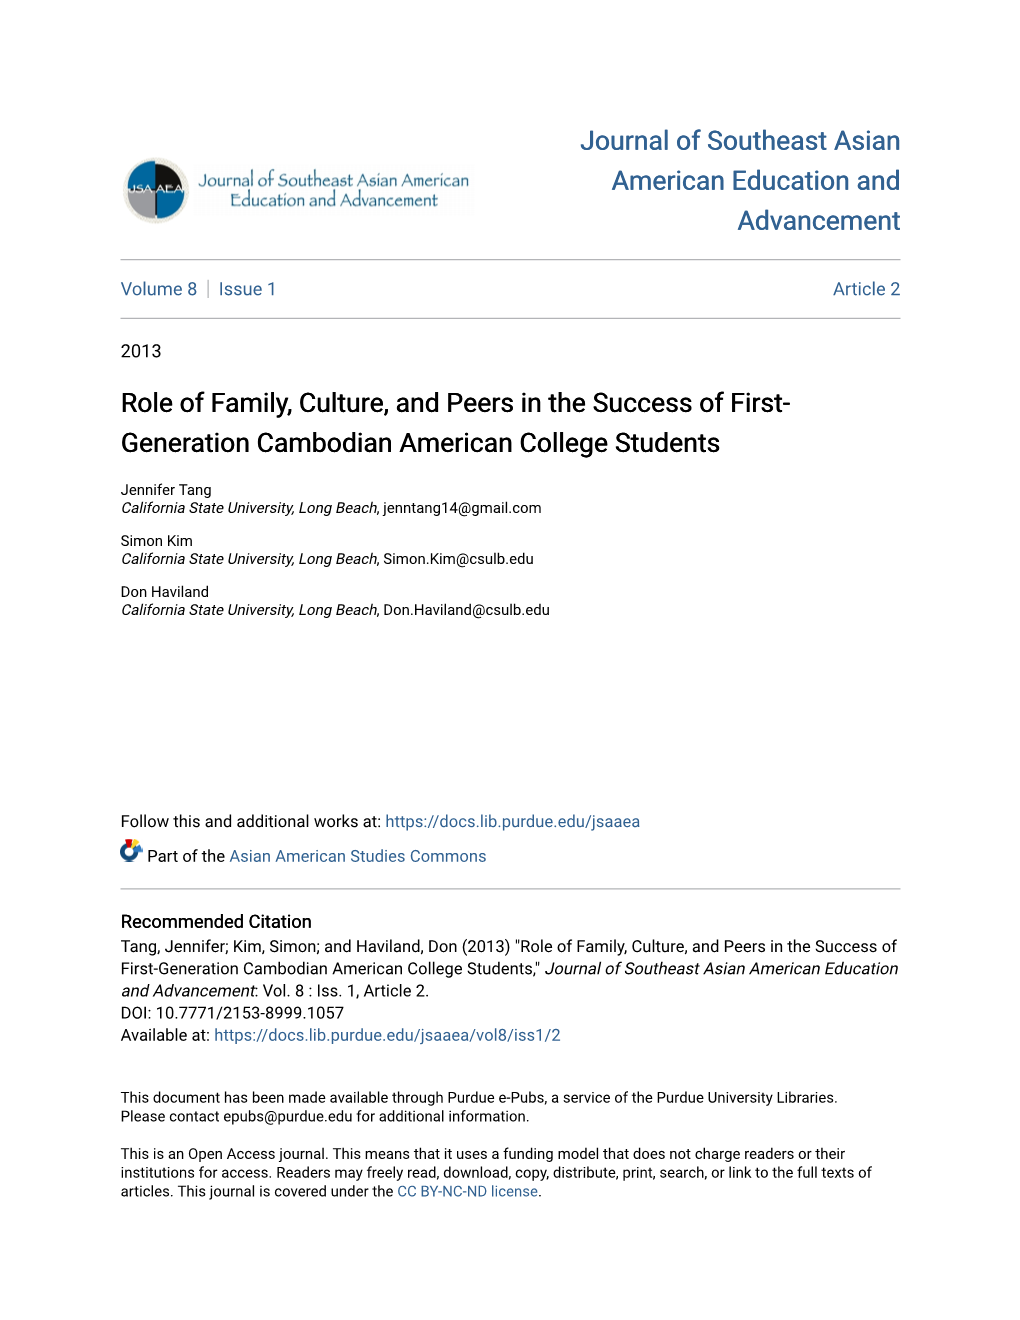 Role of Family, Culture, and Peers in the Success of First-Generation